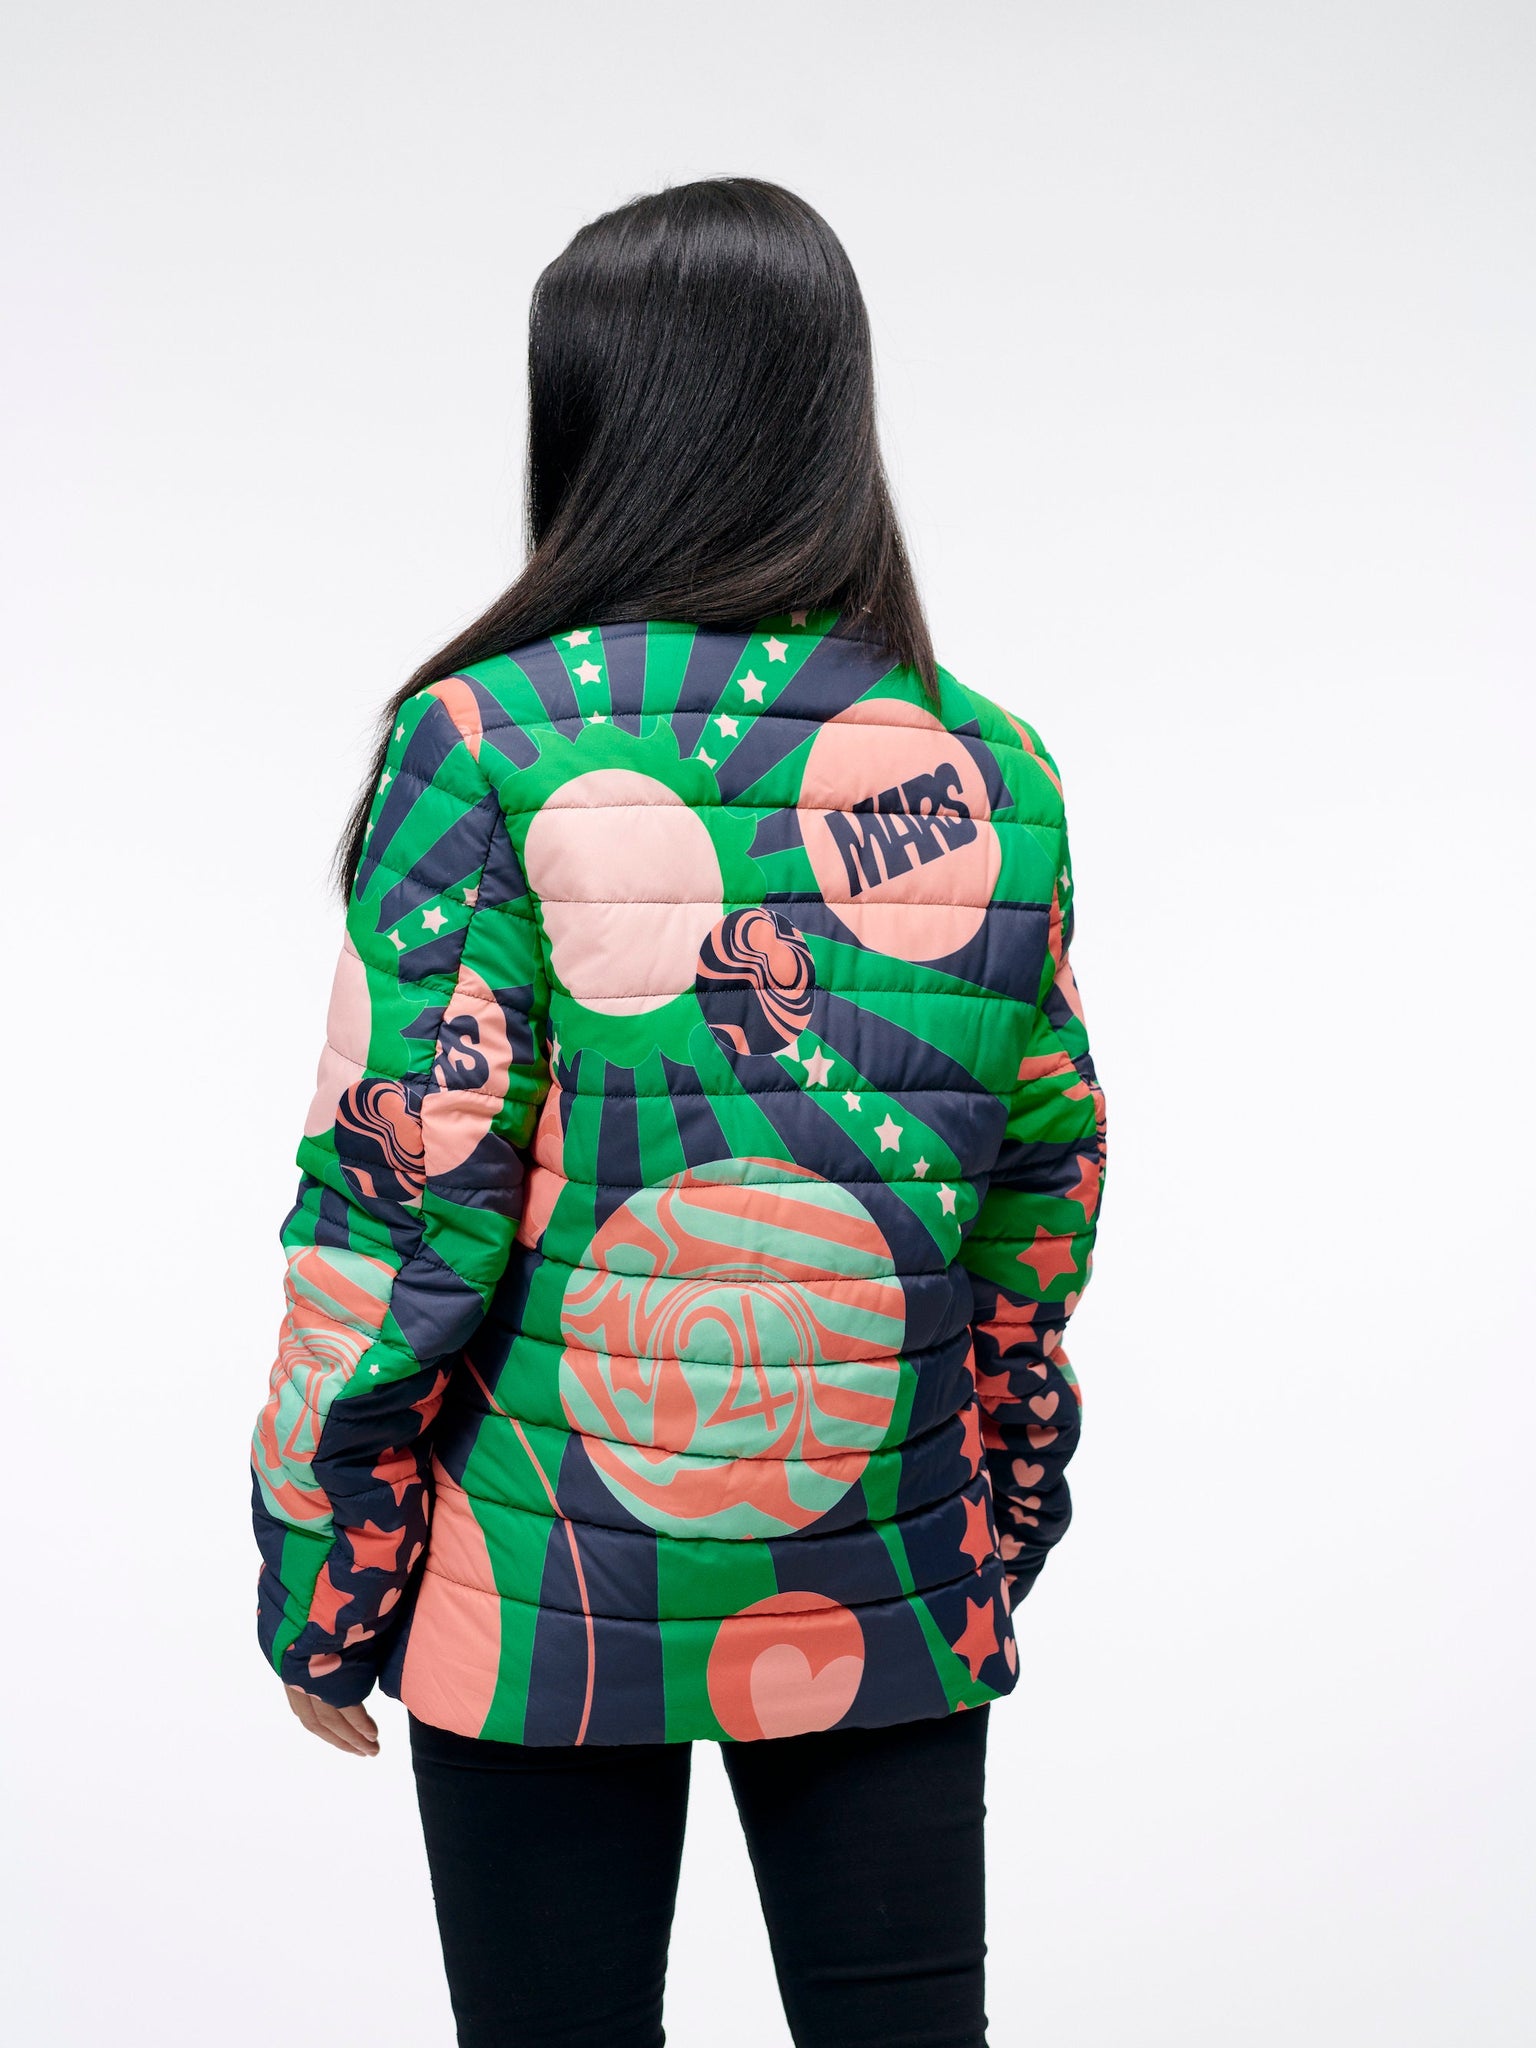 The Planetary Sun Beam Jacket | A Psychedelic Design for the Intergalactic | Quilted Zippered Jacket in Green and Red Artwork | Goose Taffy